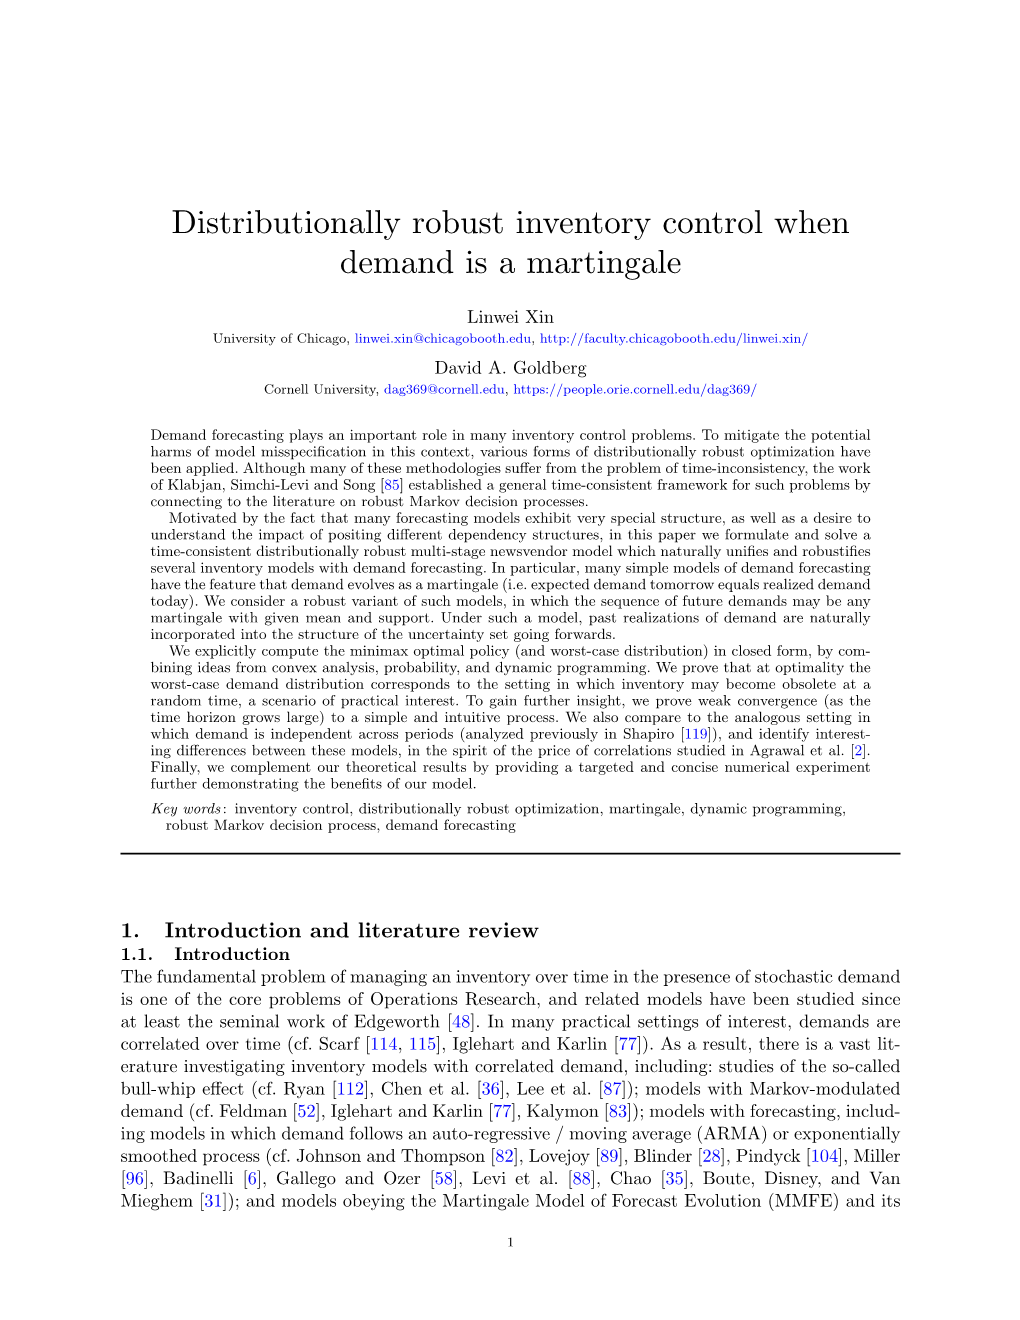 Distributionally Robust Inventory Control When Demand Is a Martingale